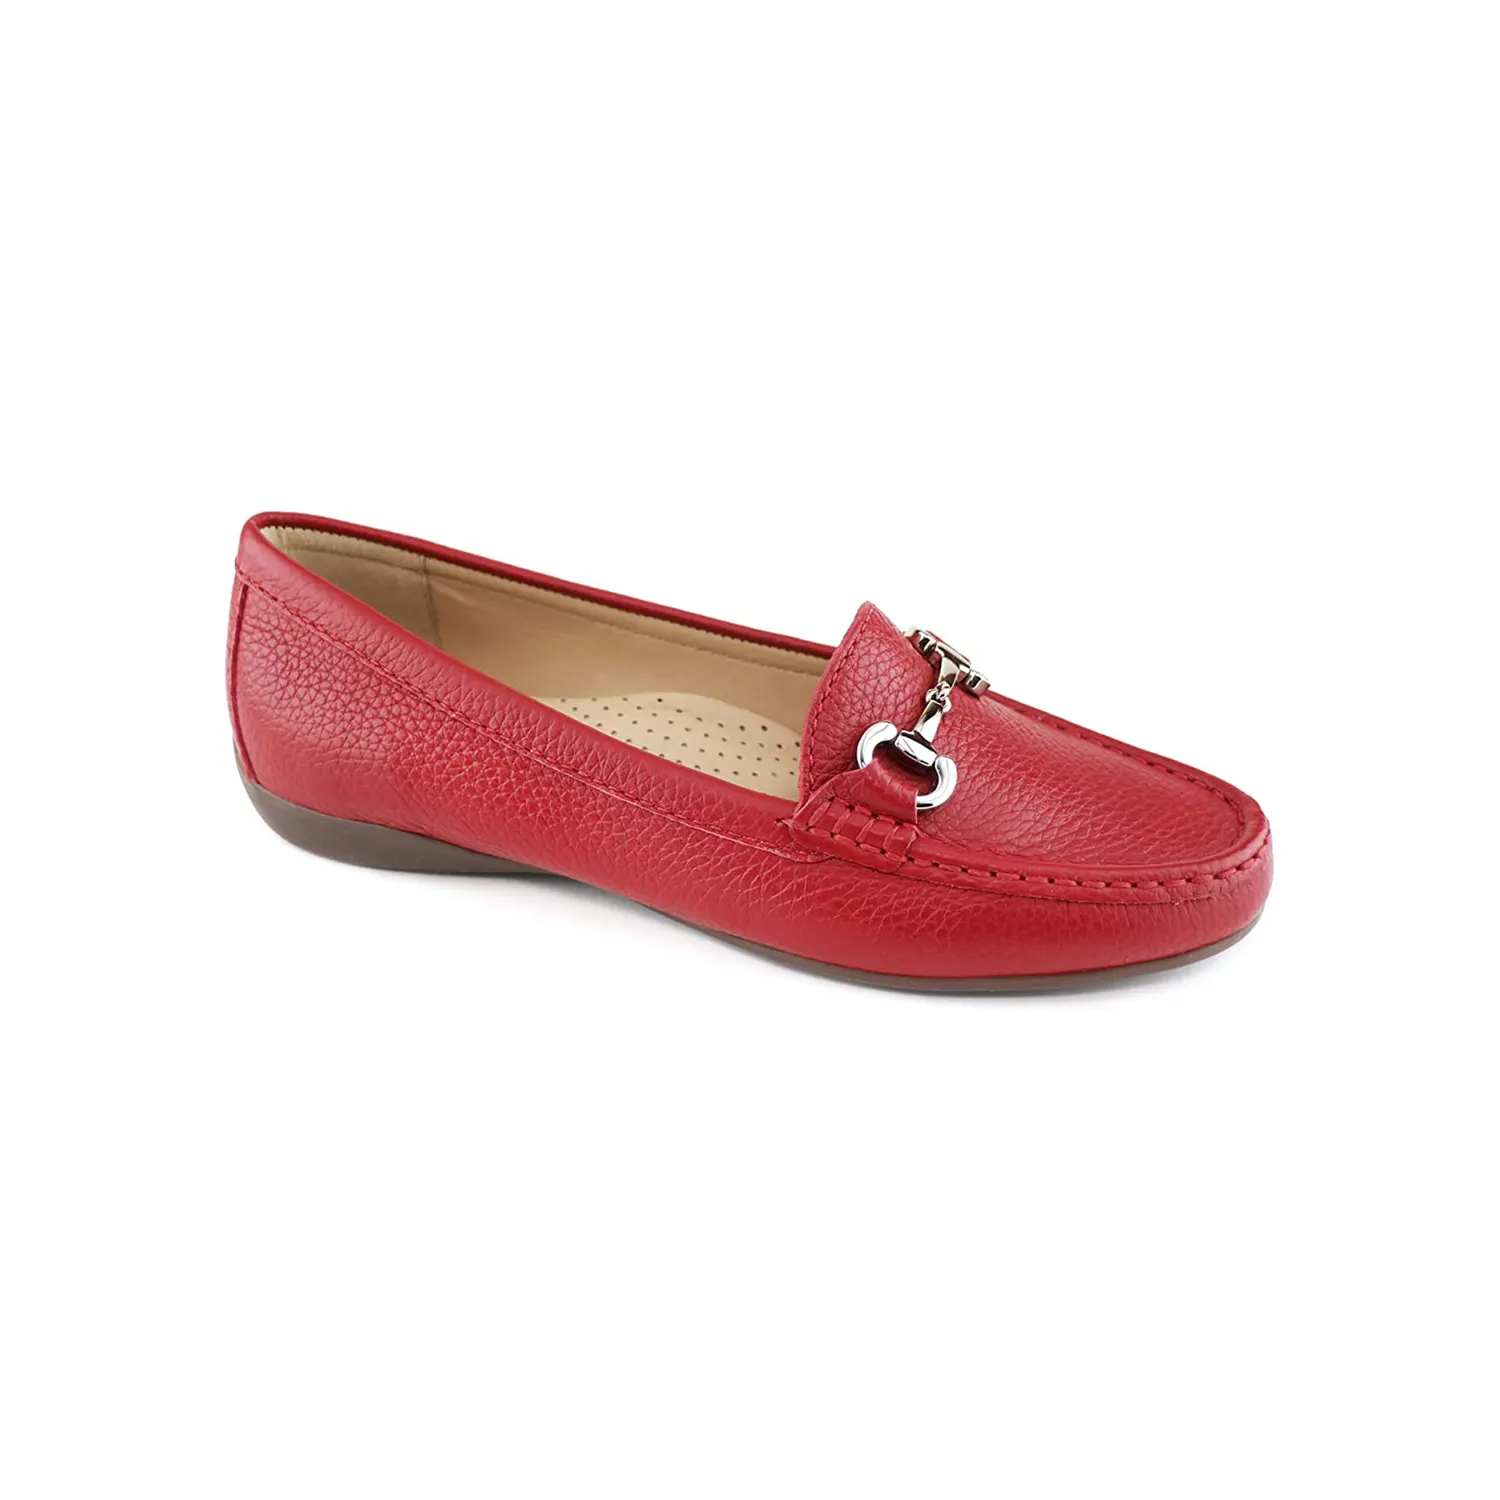 Women's Classic Genuine Leather Penny Loafers Driving Moccasins Casual Slip On Boat Shoes Fashion Red Shoes